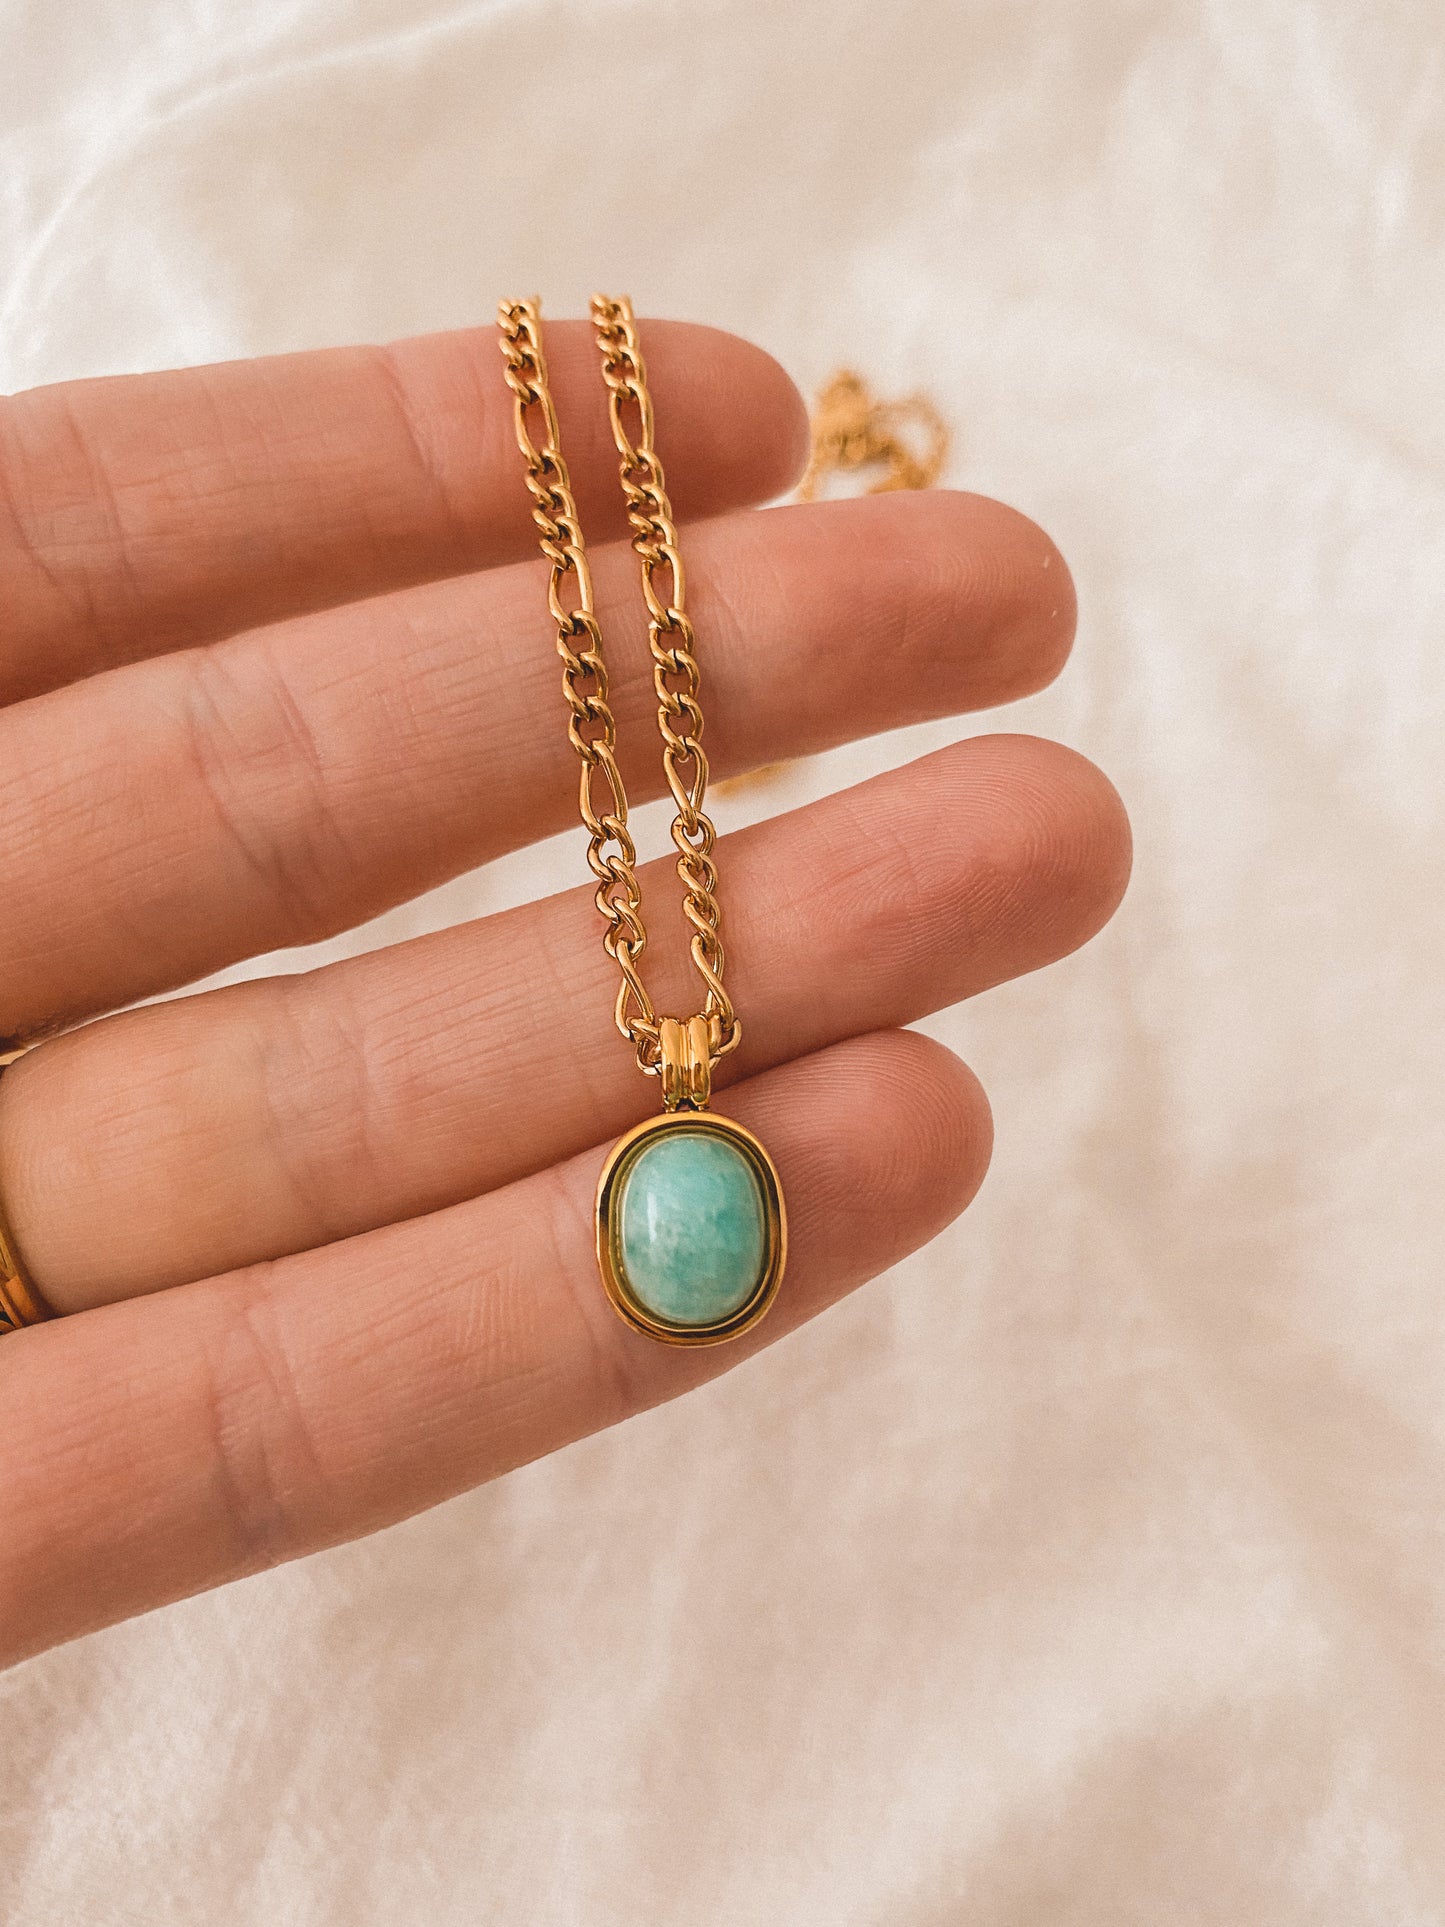 Tans + Turquoise Necklace